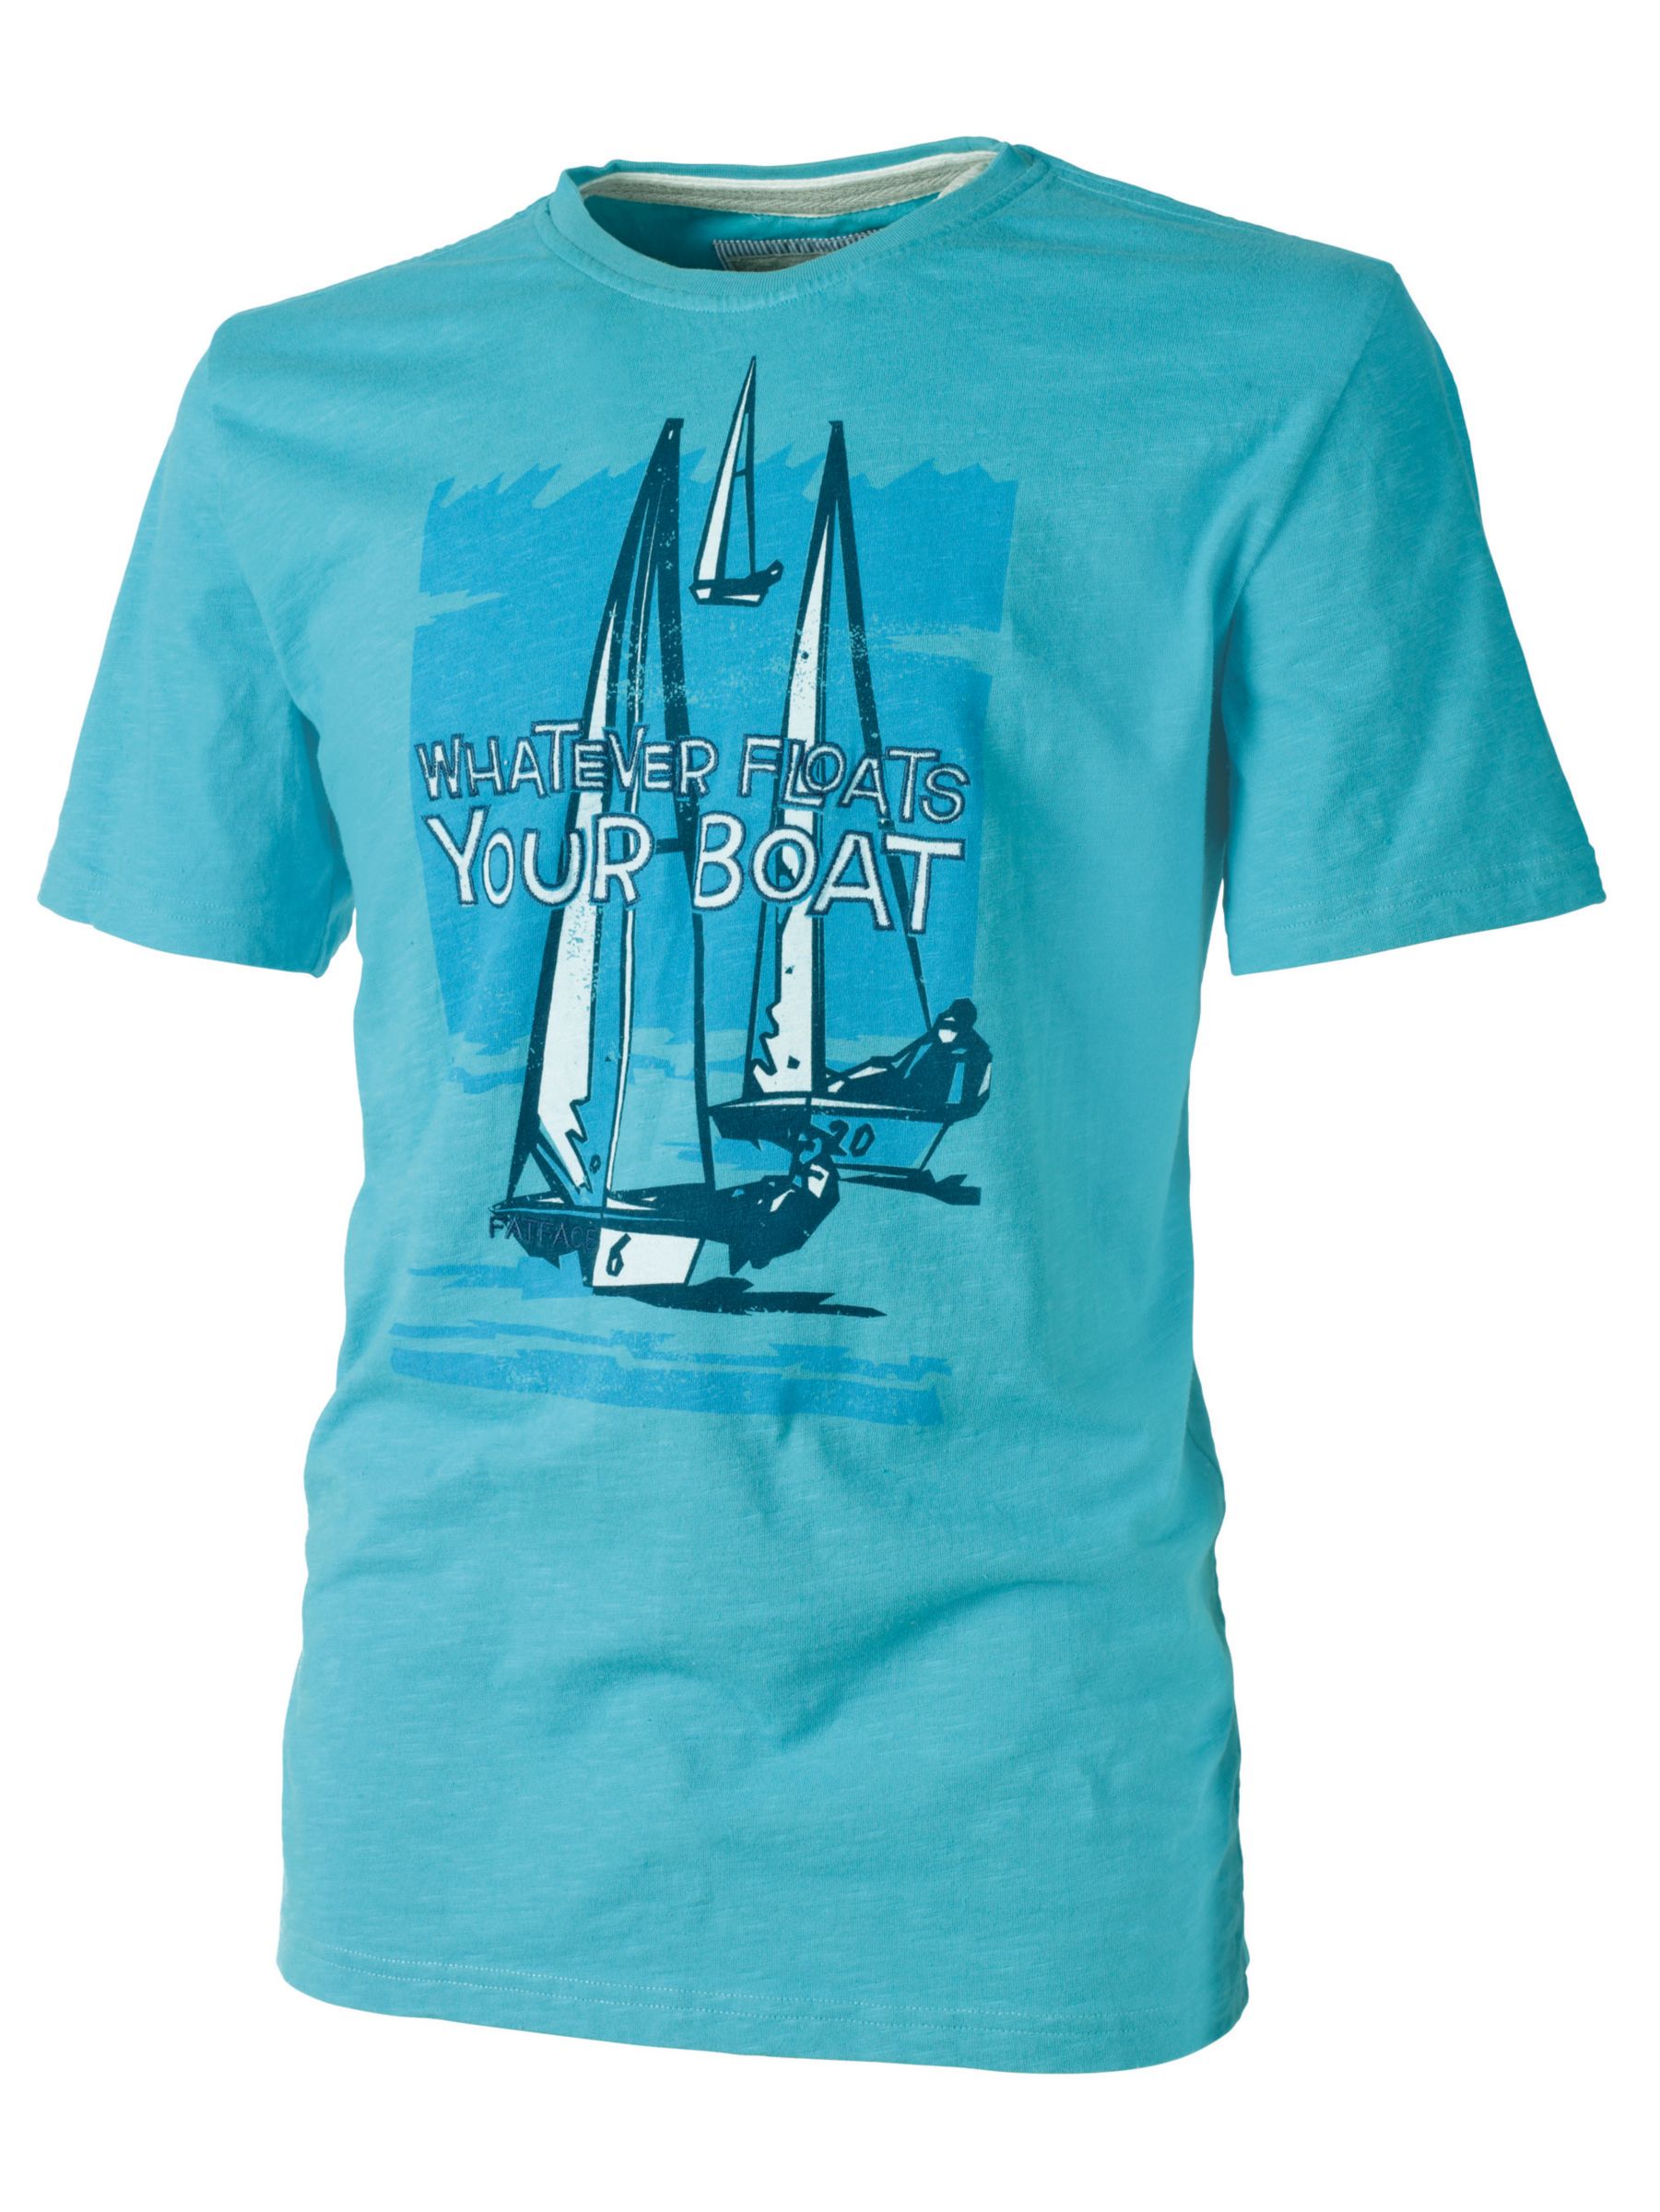 Whatever Floats Your Boat T-Shirt,